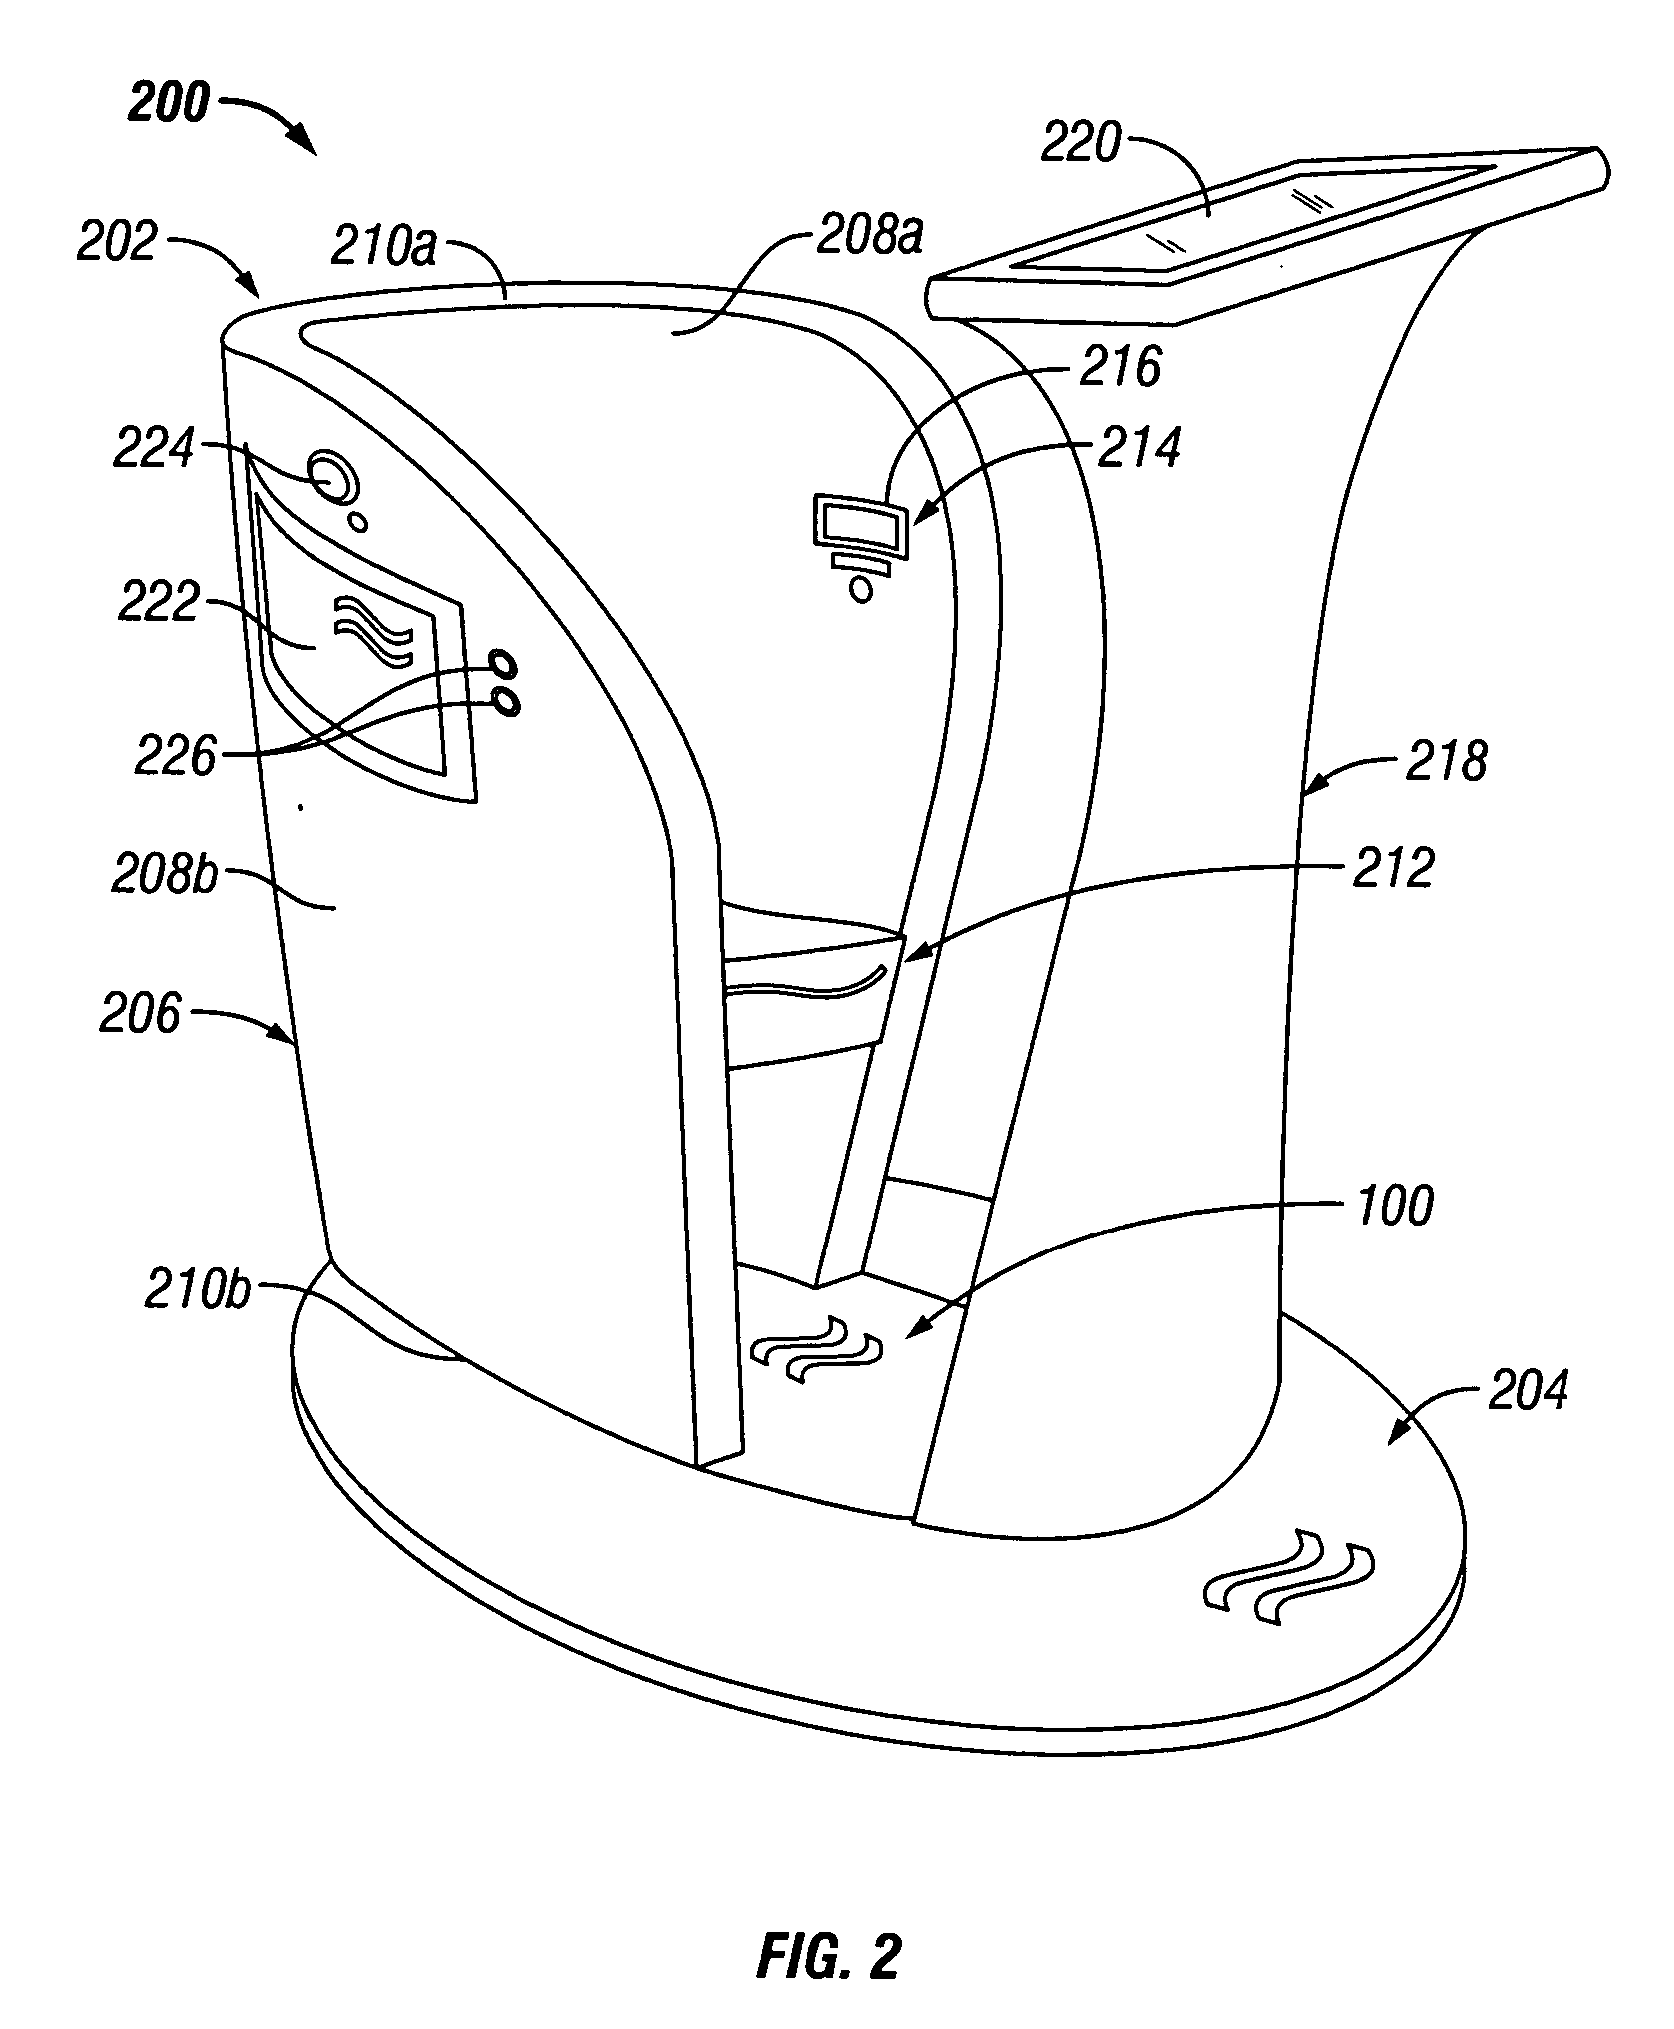 Dynamic motion therapy apparatus having a treatment feedback indicator